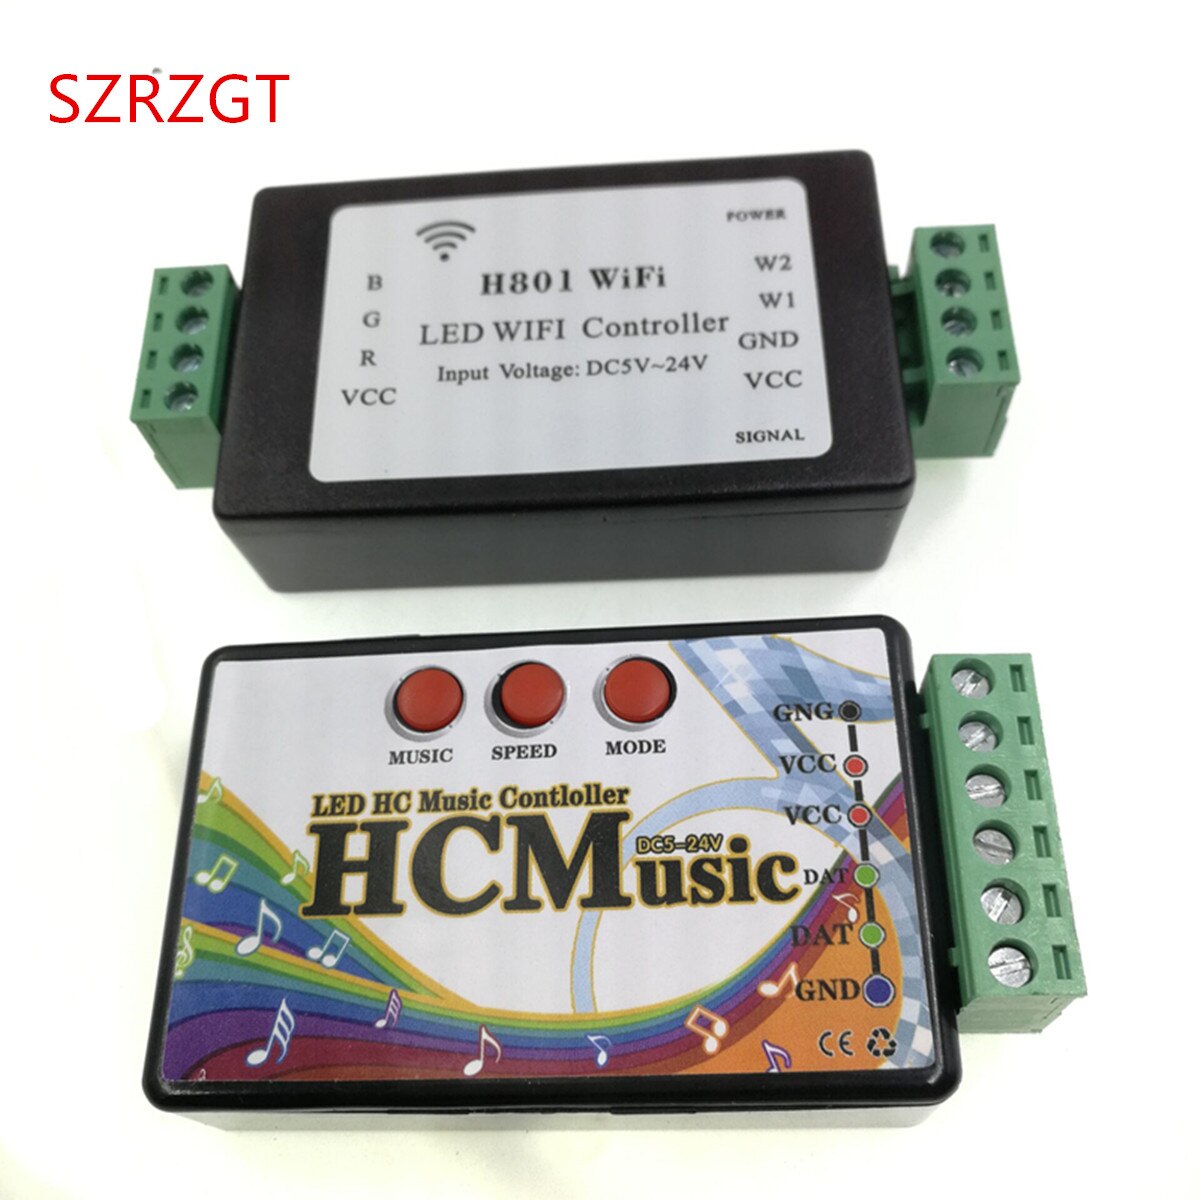 1pcs H801 WiFi; RGBW LED WIFI controller; RGBW WiFi LED H801 Controller; DC5-24V ingang; 4CH * 4A uitgang